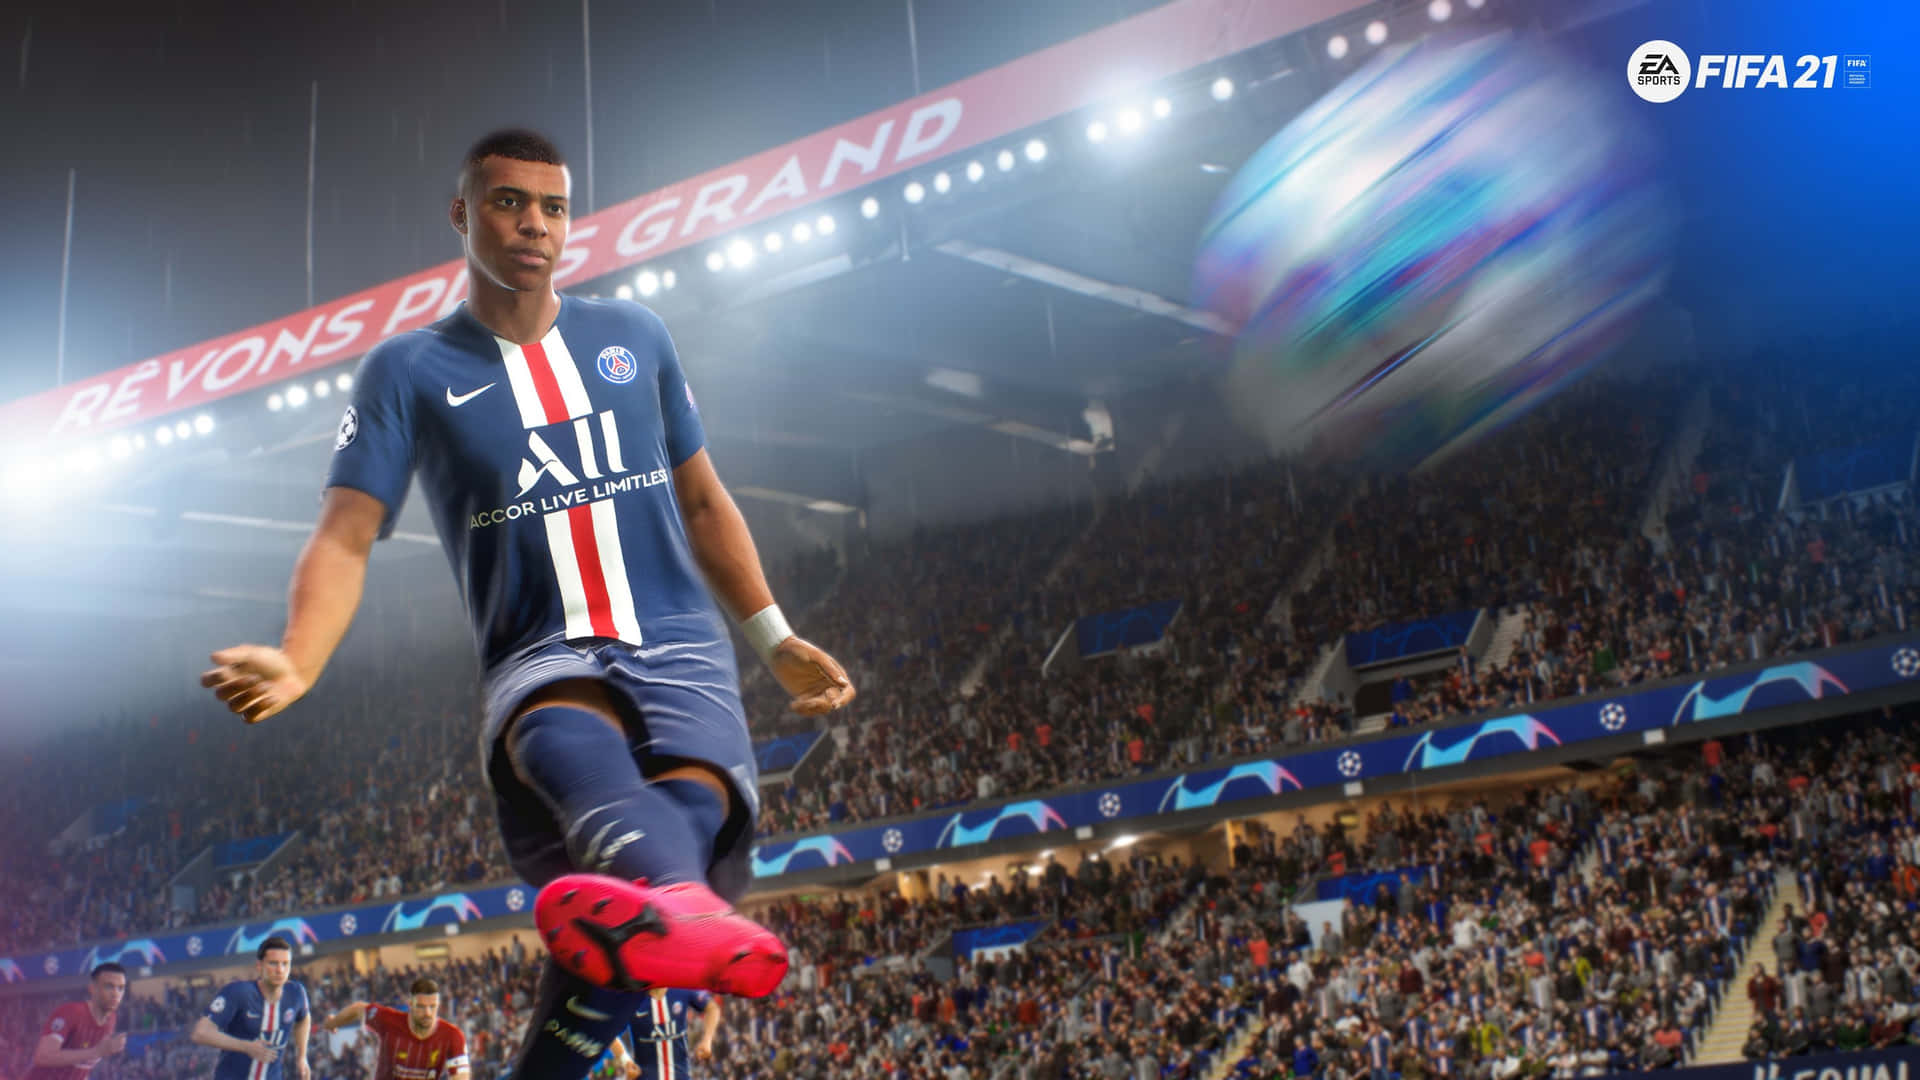 Get ready to dominate in FIFA 21